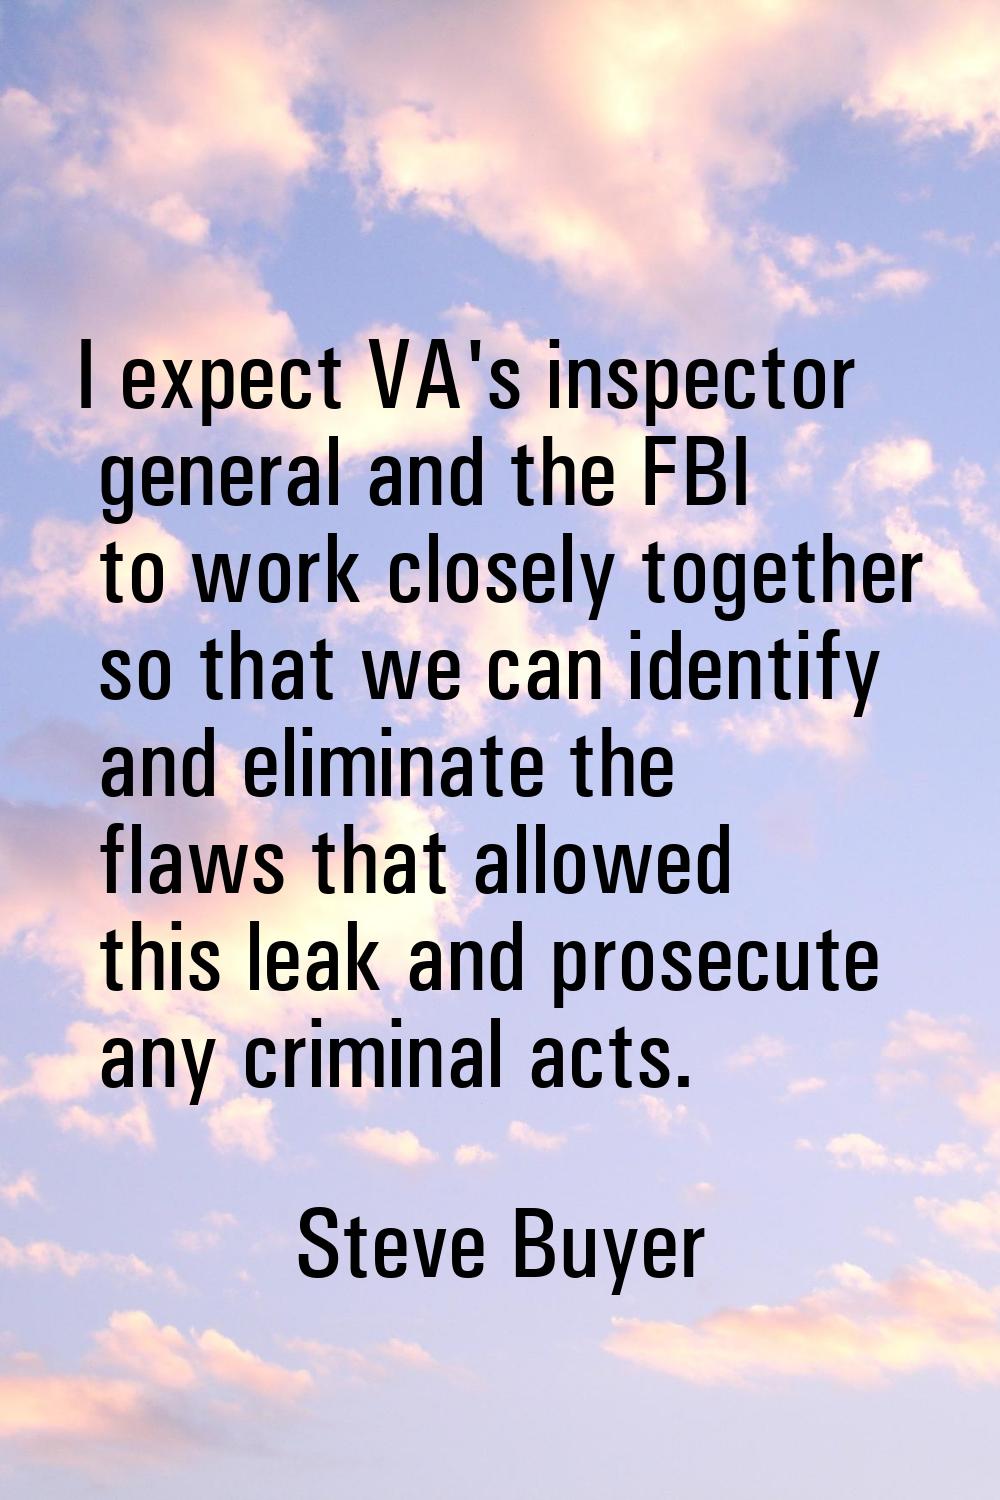 I expect VA's inspector general and the FBI to work closely together so that we can identify and el